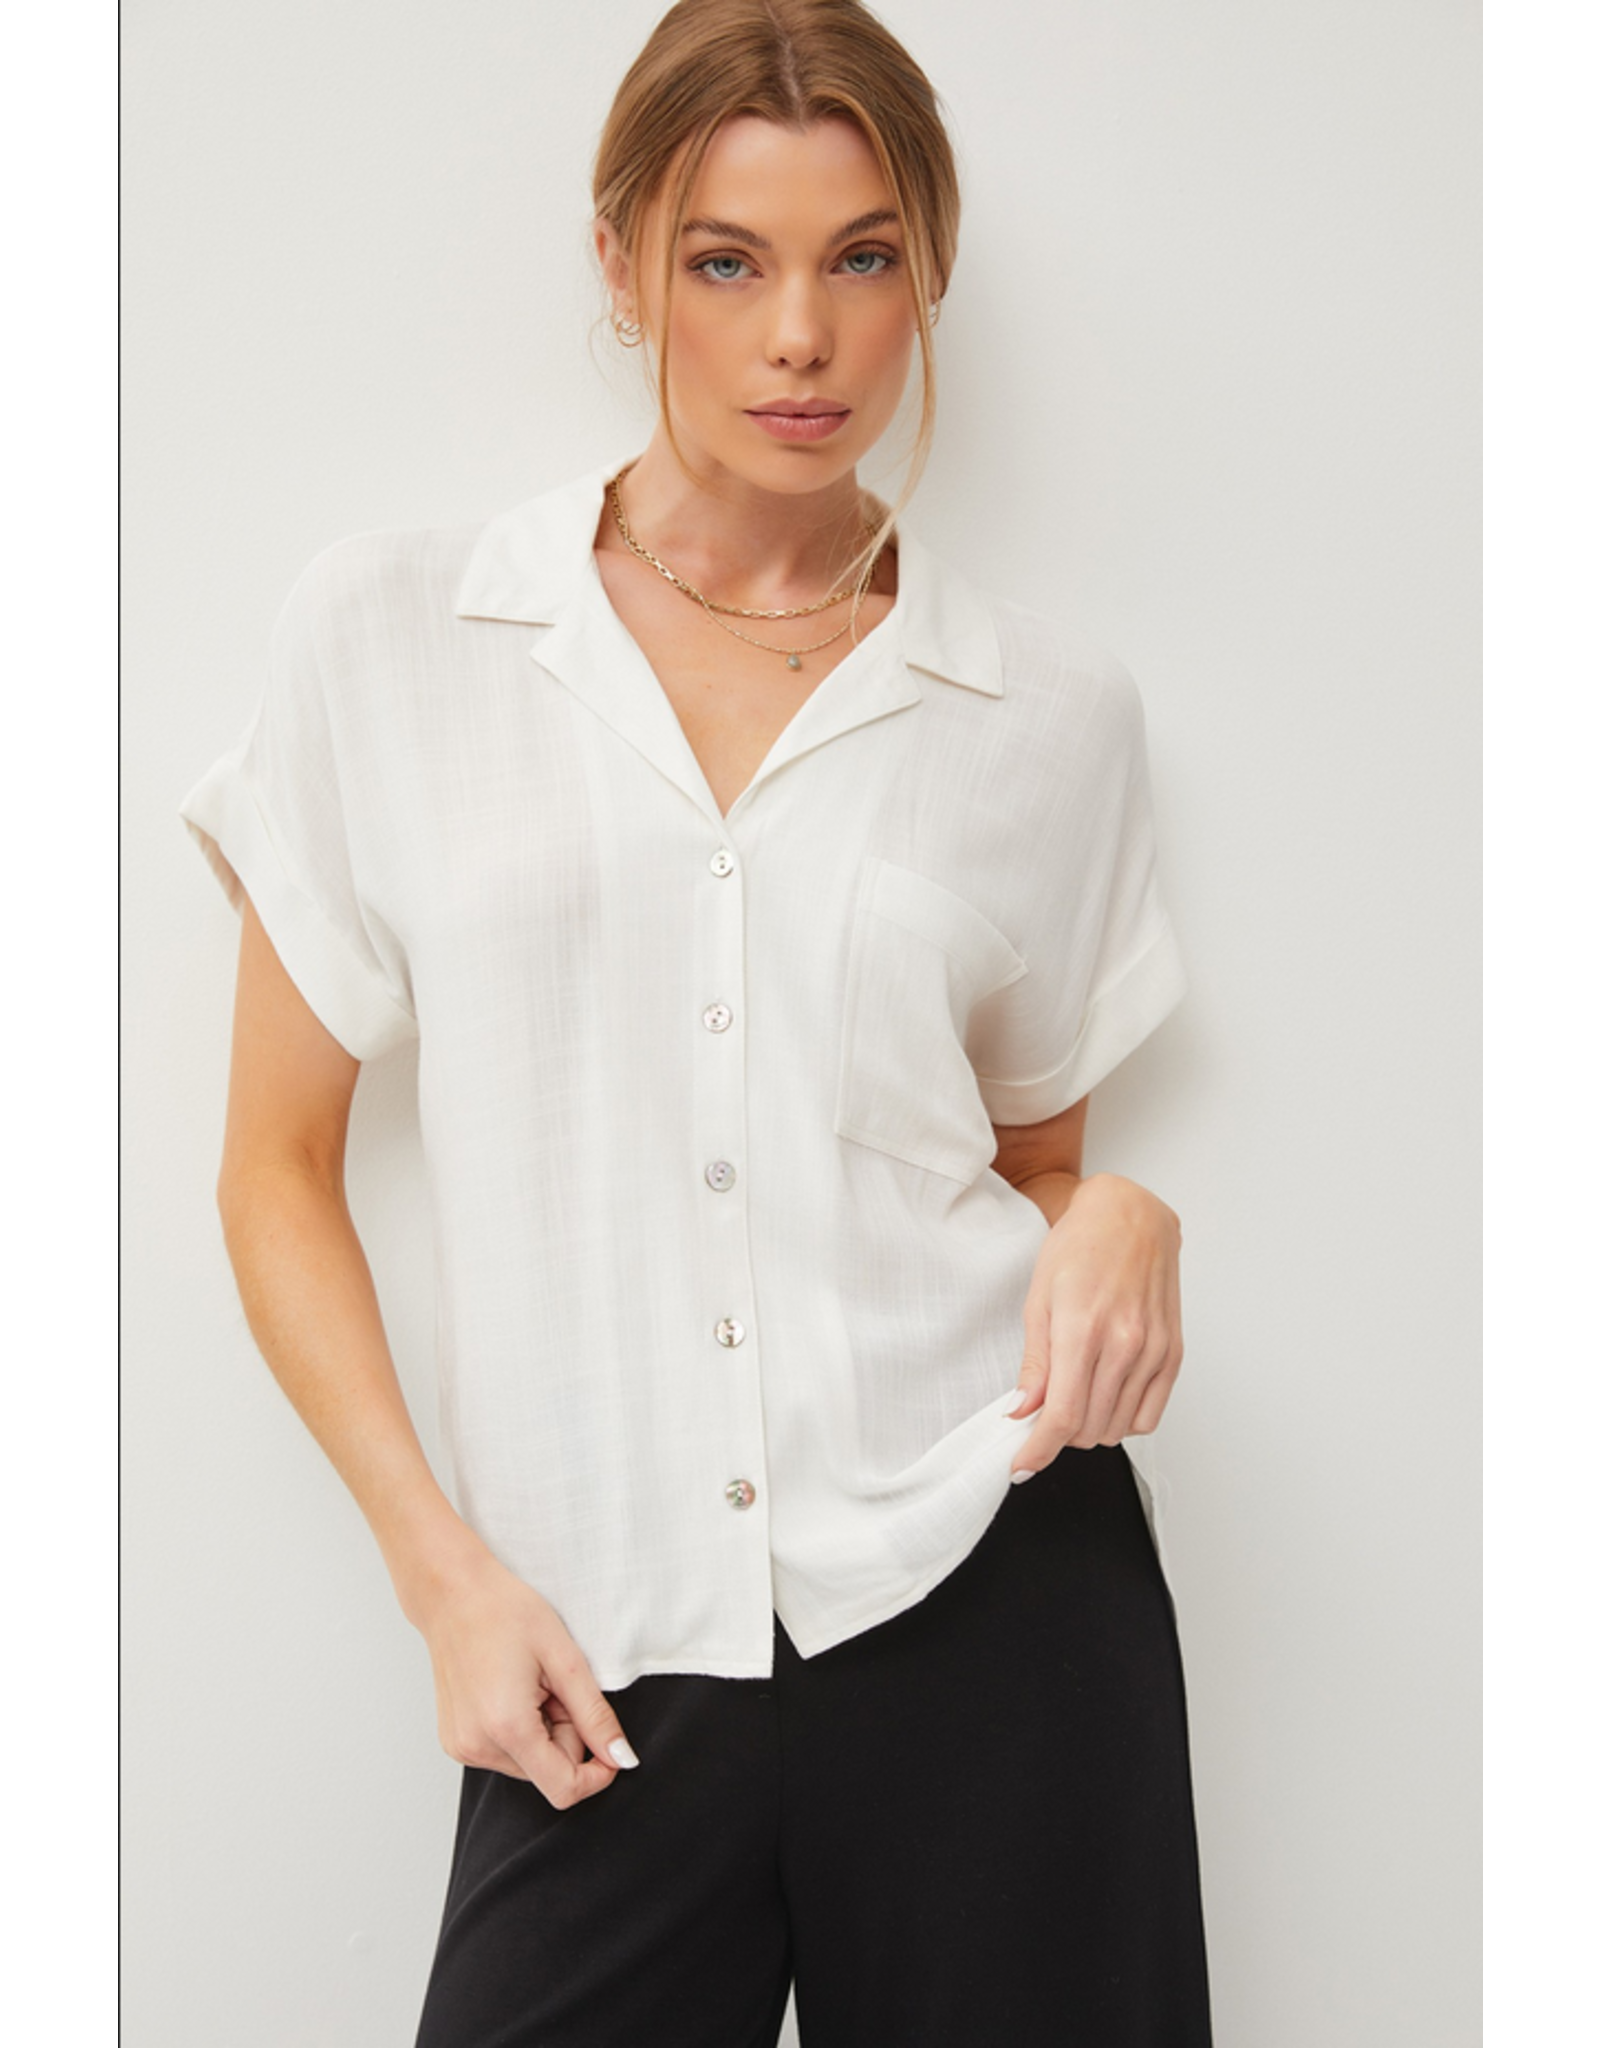 Be Cool Short Sleeve Button Down Top